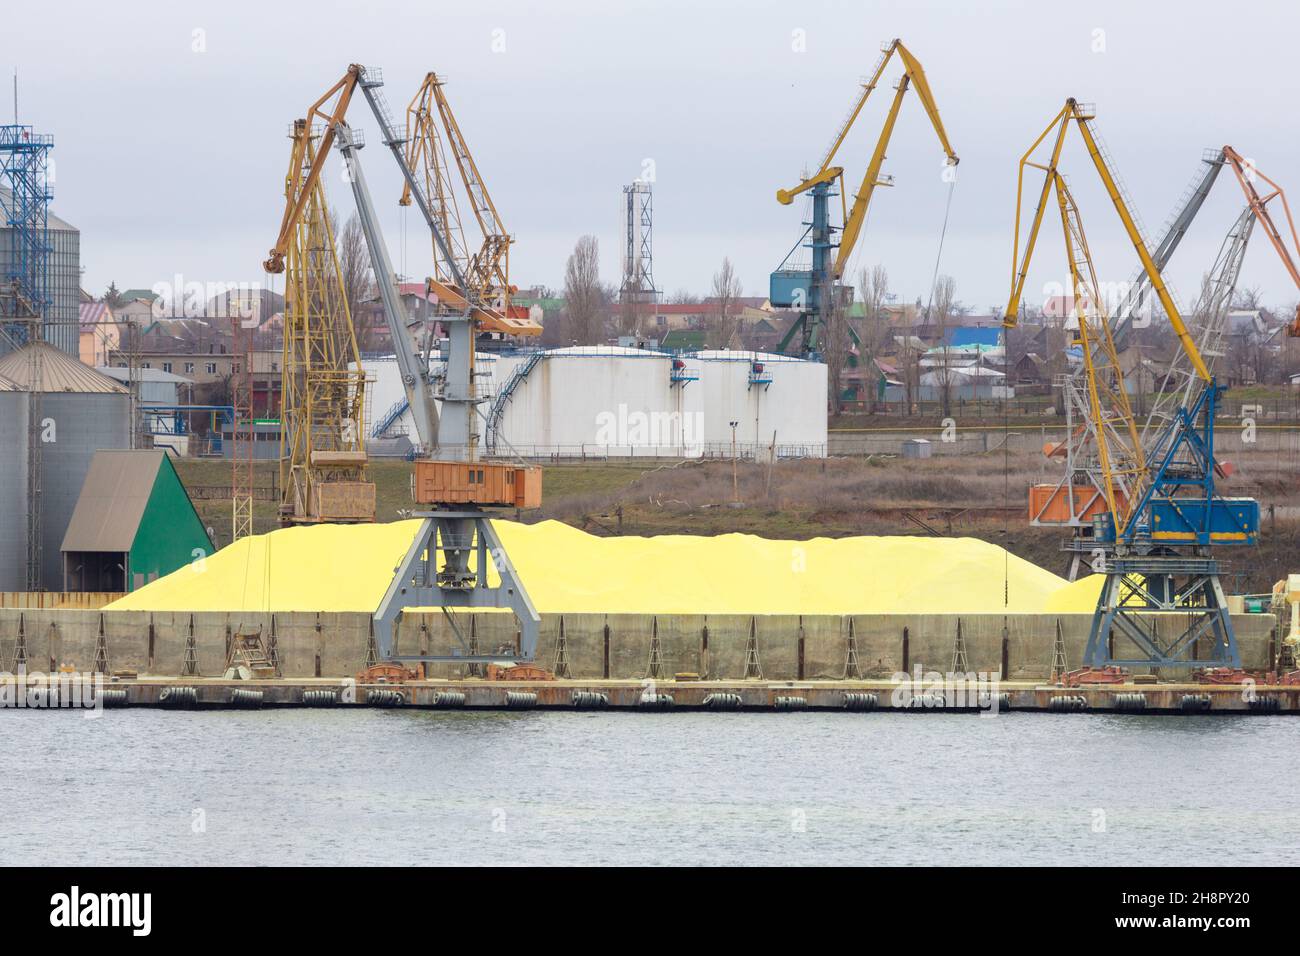 Huge stockpile of industrial sulfur that will be shipped around world. Industrial Sulfur Stockyard and Pile. Huge stockpile of sulfur in sea port at b Stock Photo